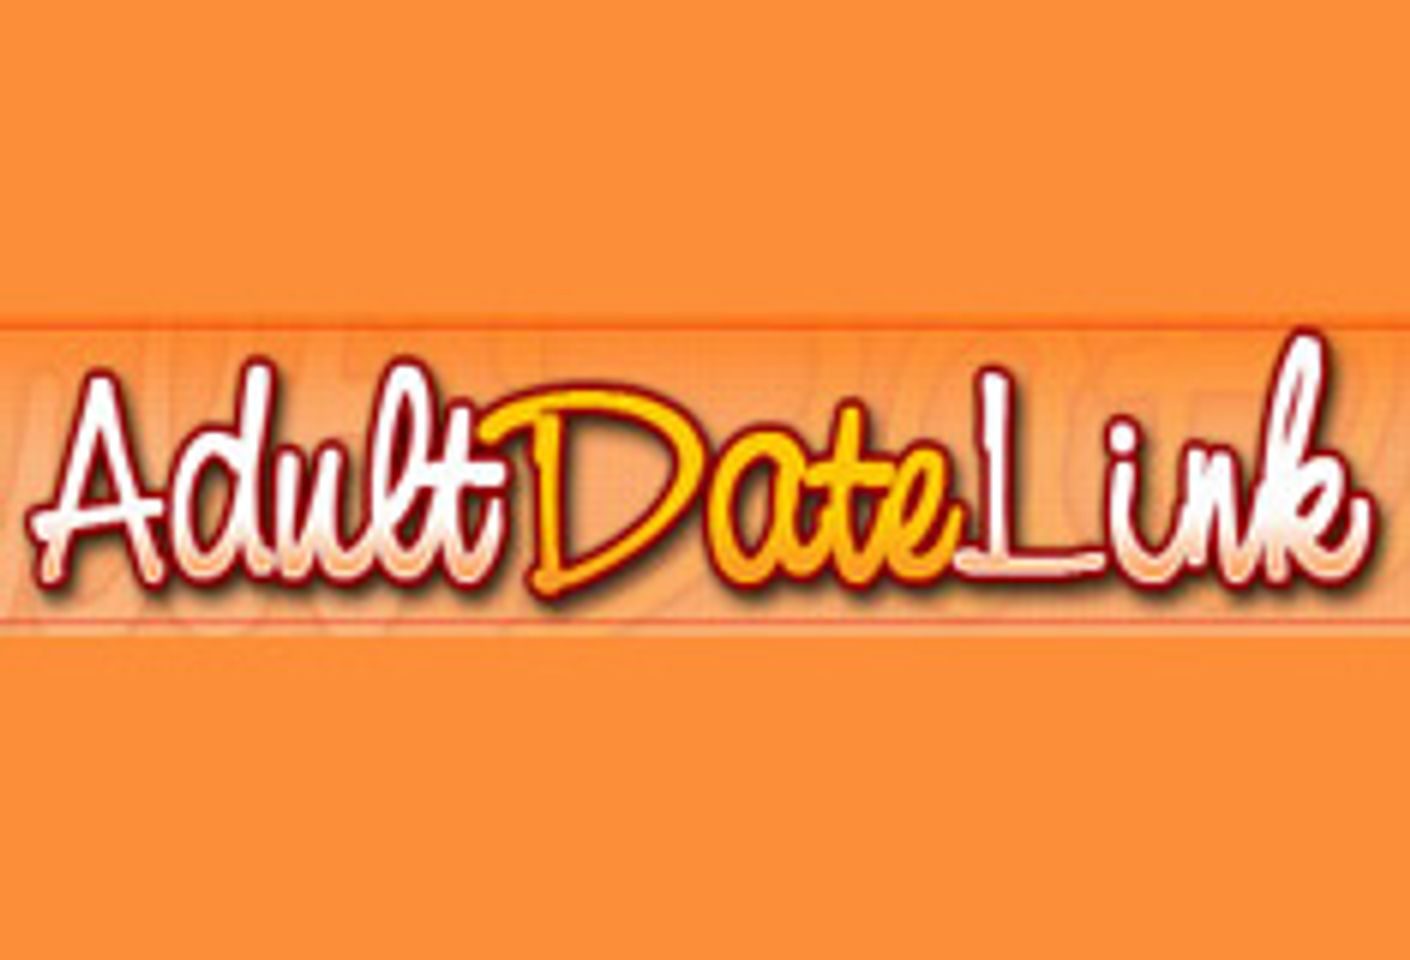 AdultDateLink Post-Join API Covers Over 40 Niches